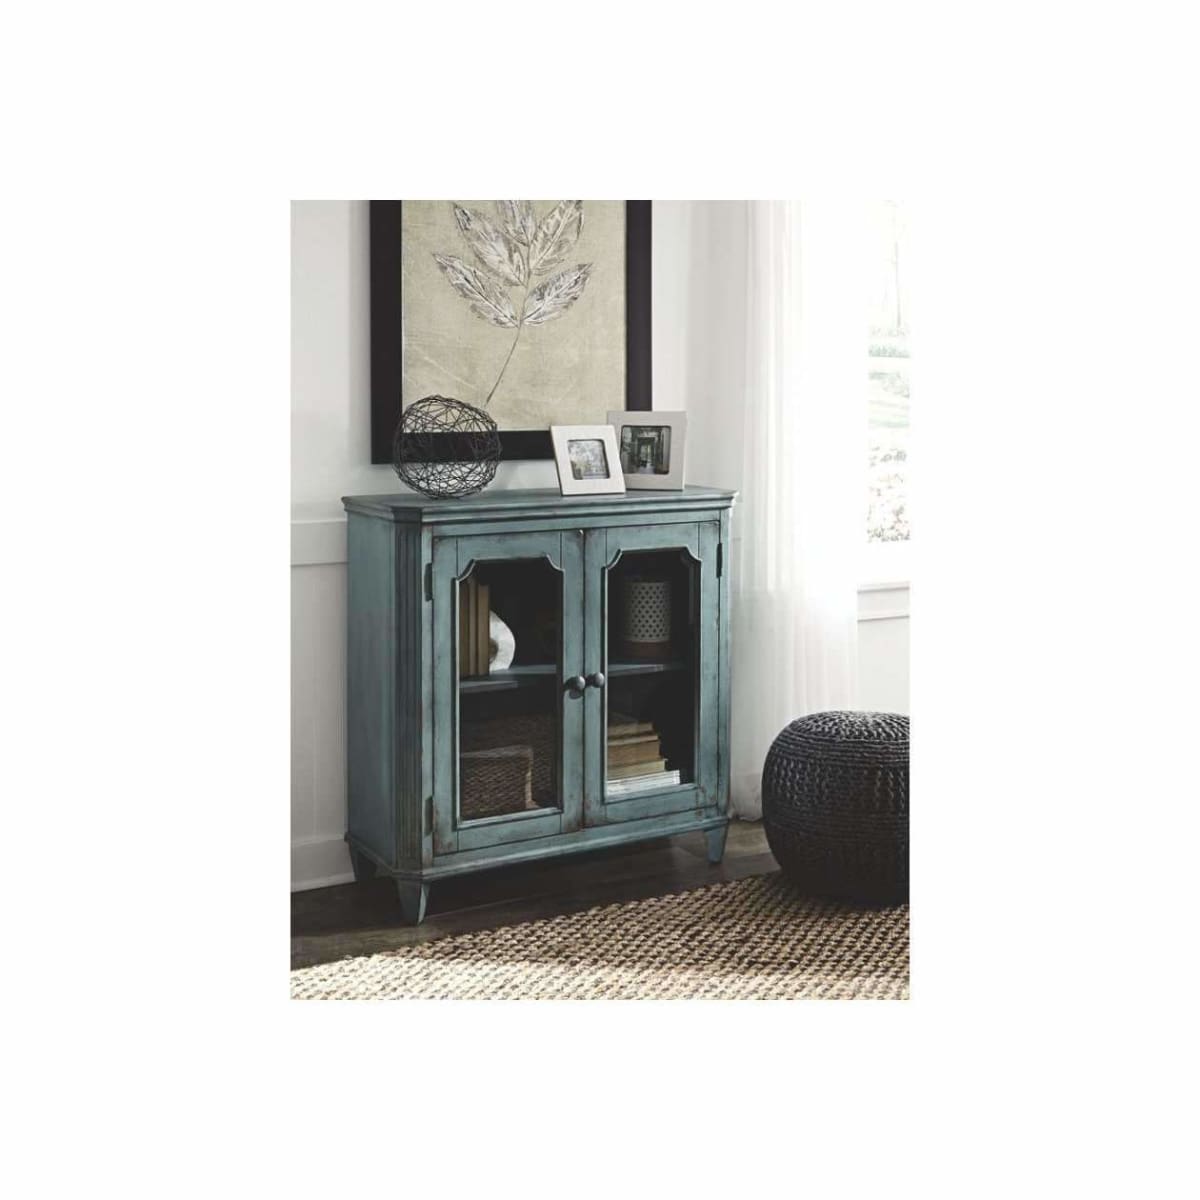 Mirimyn Antique Teal Small Accent Cabinet - accent cabinet